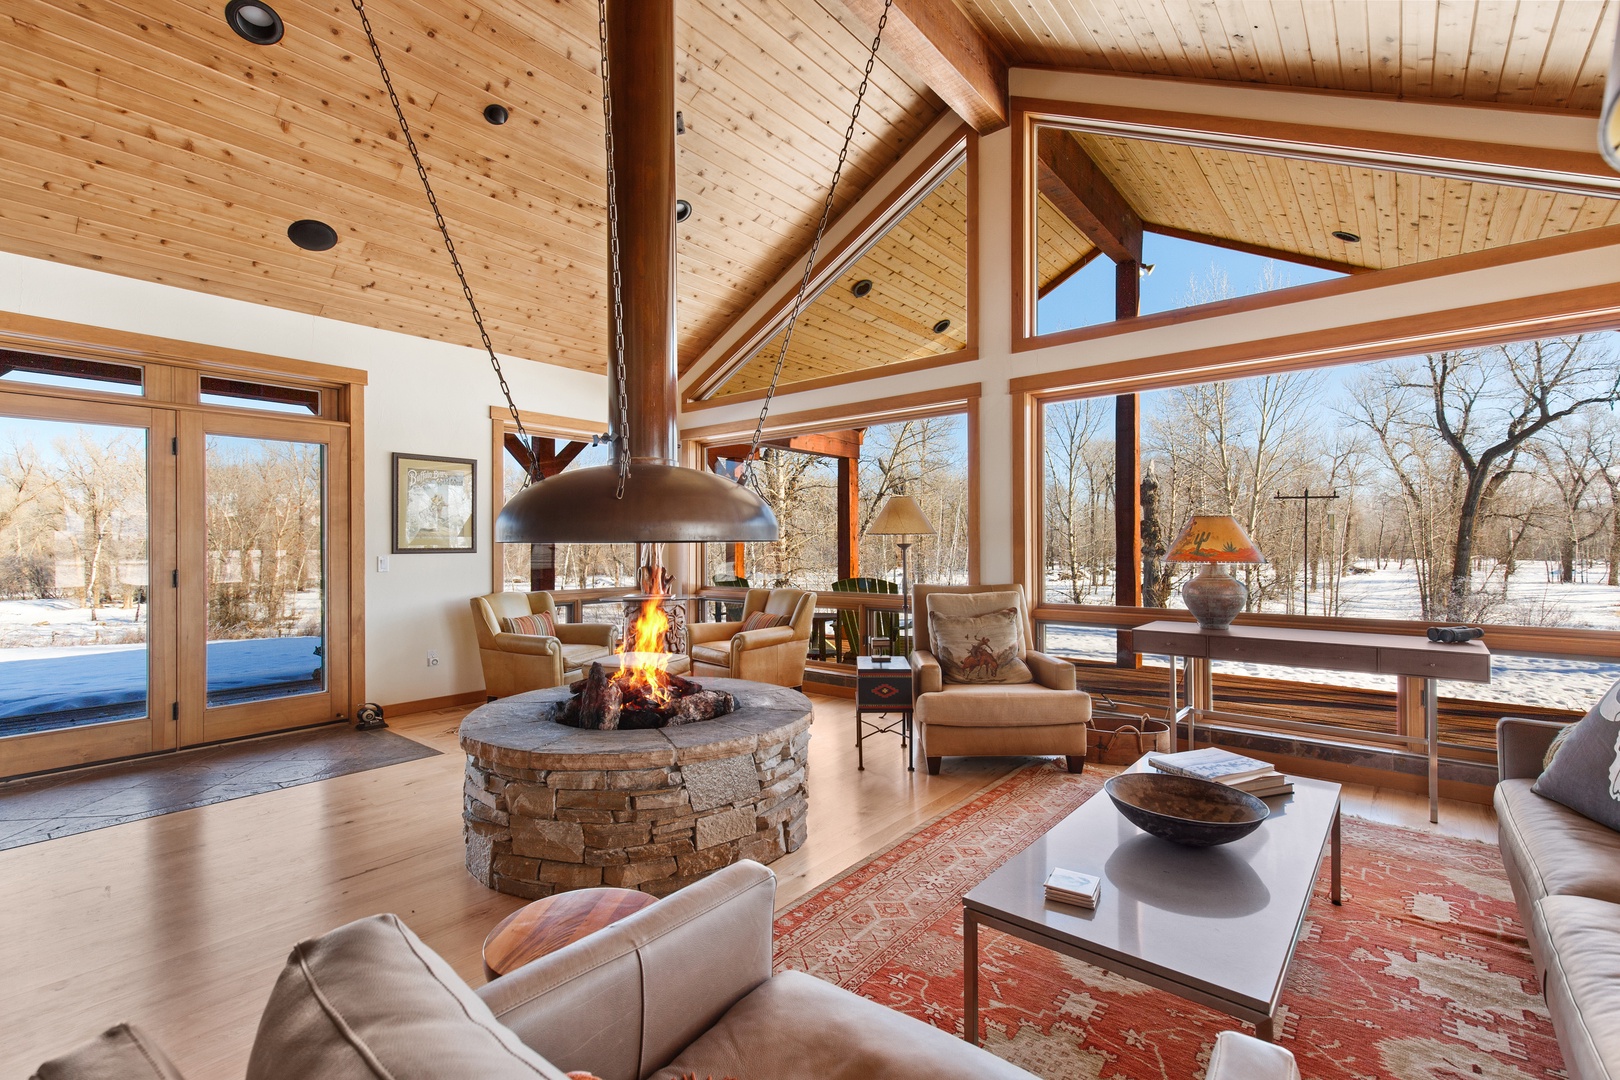 Bozeman Vacation Rentals, The Woodland Oasis - Are you looking for a luxury vacation rental that offers total privacy and breathtaking views of Montana's magnificent scenery? Look no further than this secluded 3 bedroom, 2.5 bath cabin